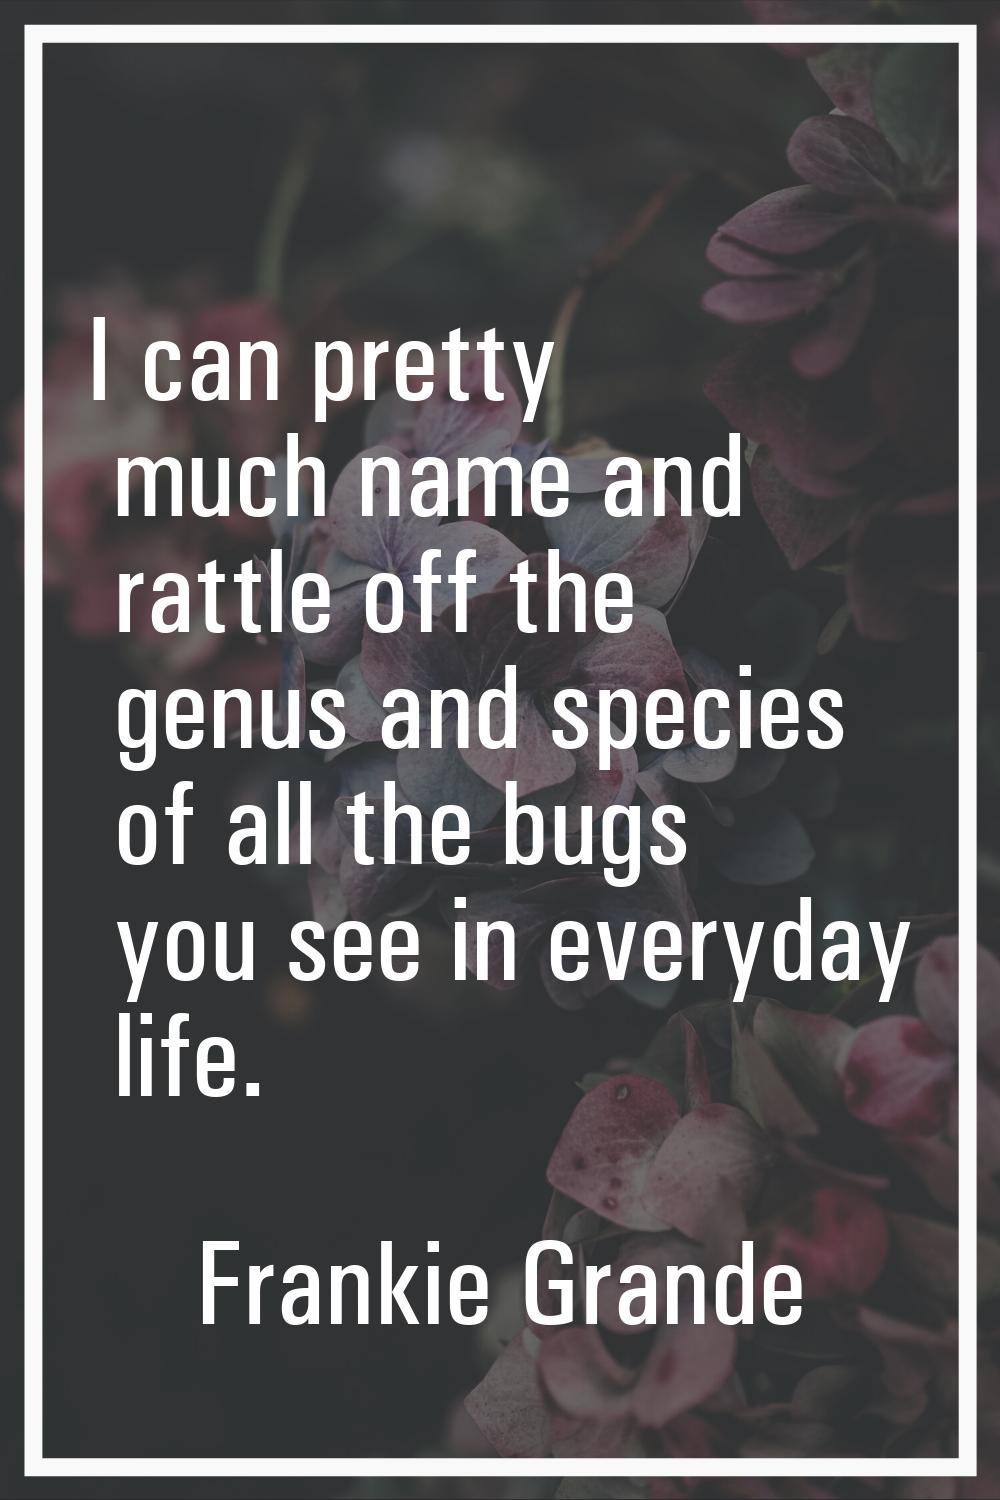 I can pretty much name and rattle off the genus and species of all the bugs you see in everyday lif